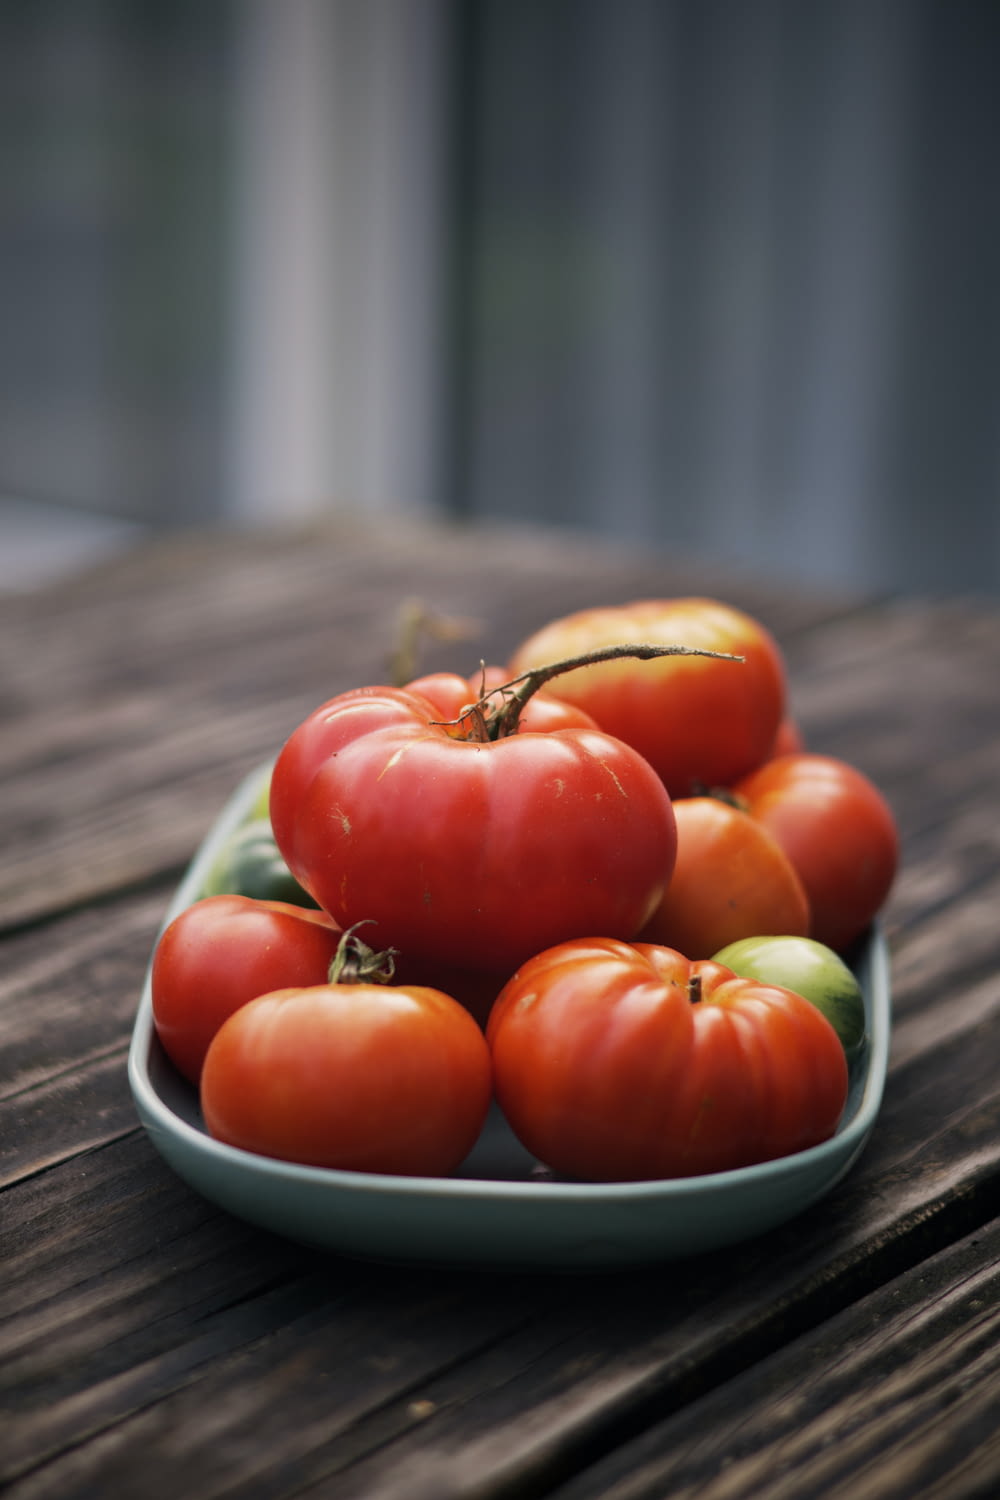 a plate of tomatoes on a wooden table